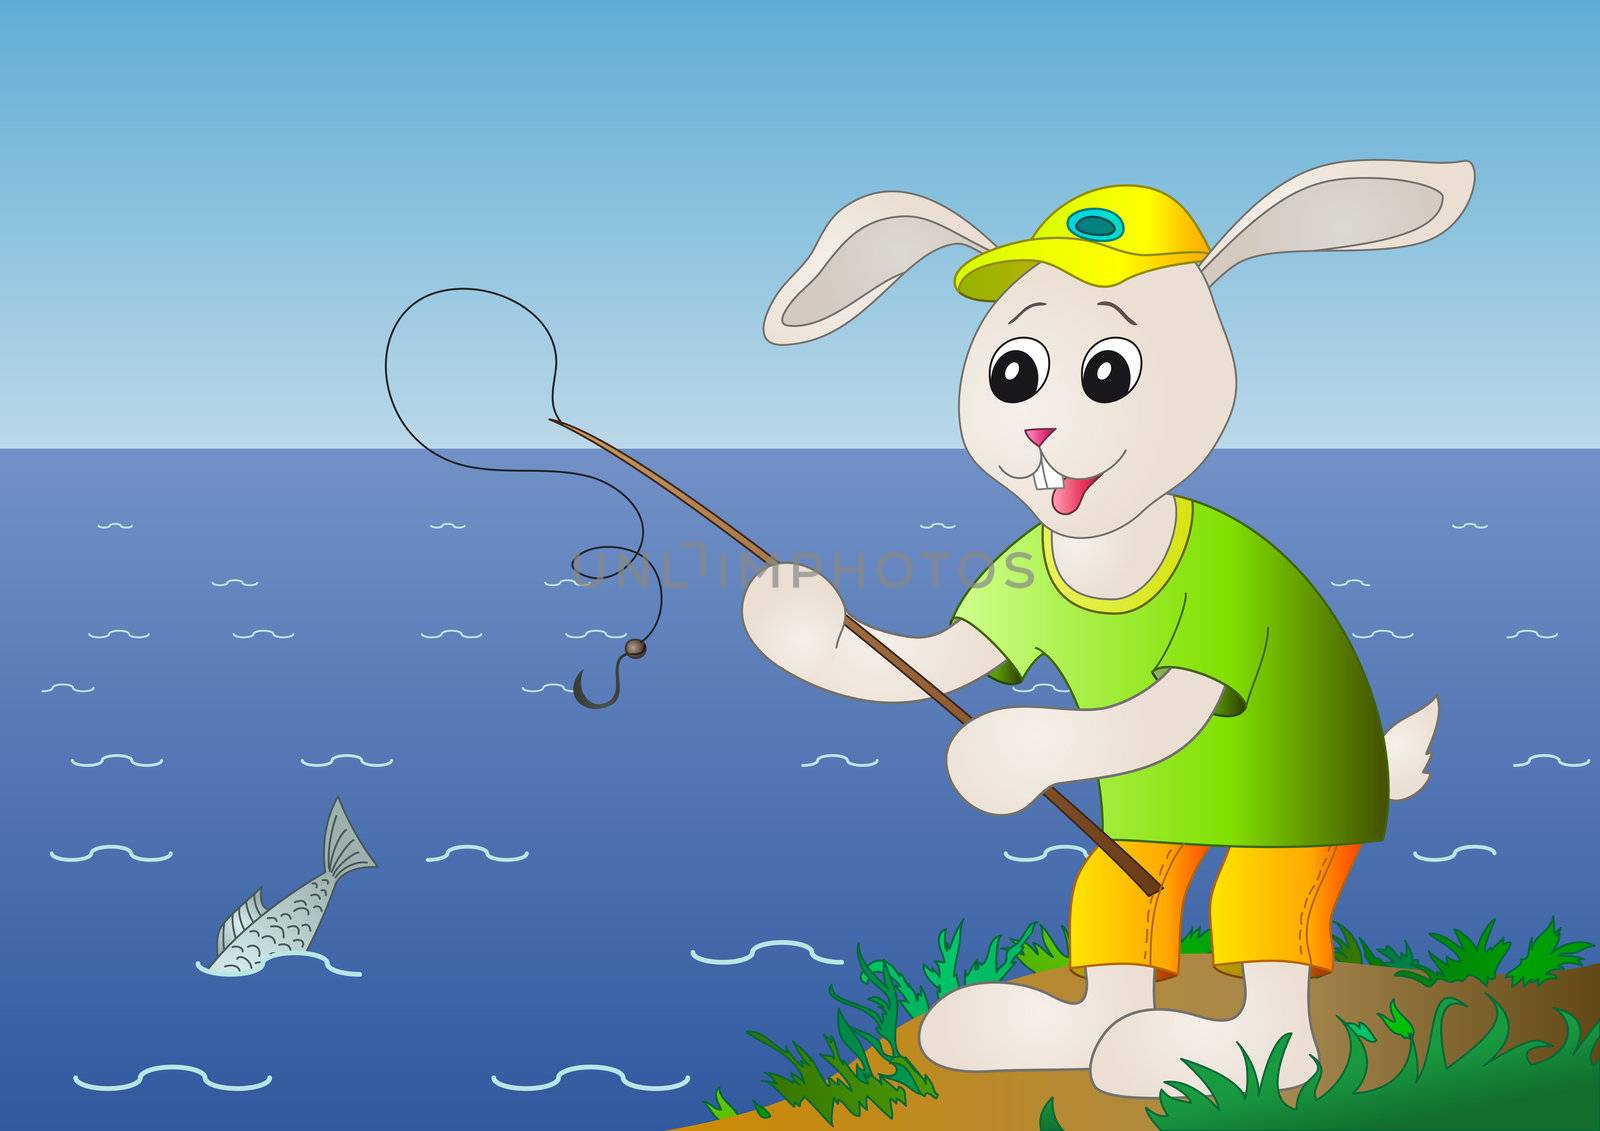 The hare fisherman fishes in the sea, but here a problem: fish Hare fishing, fish is left